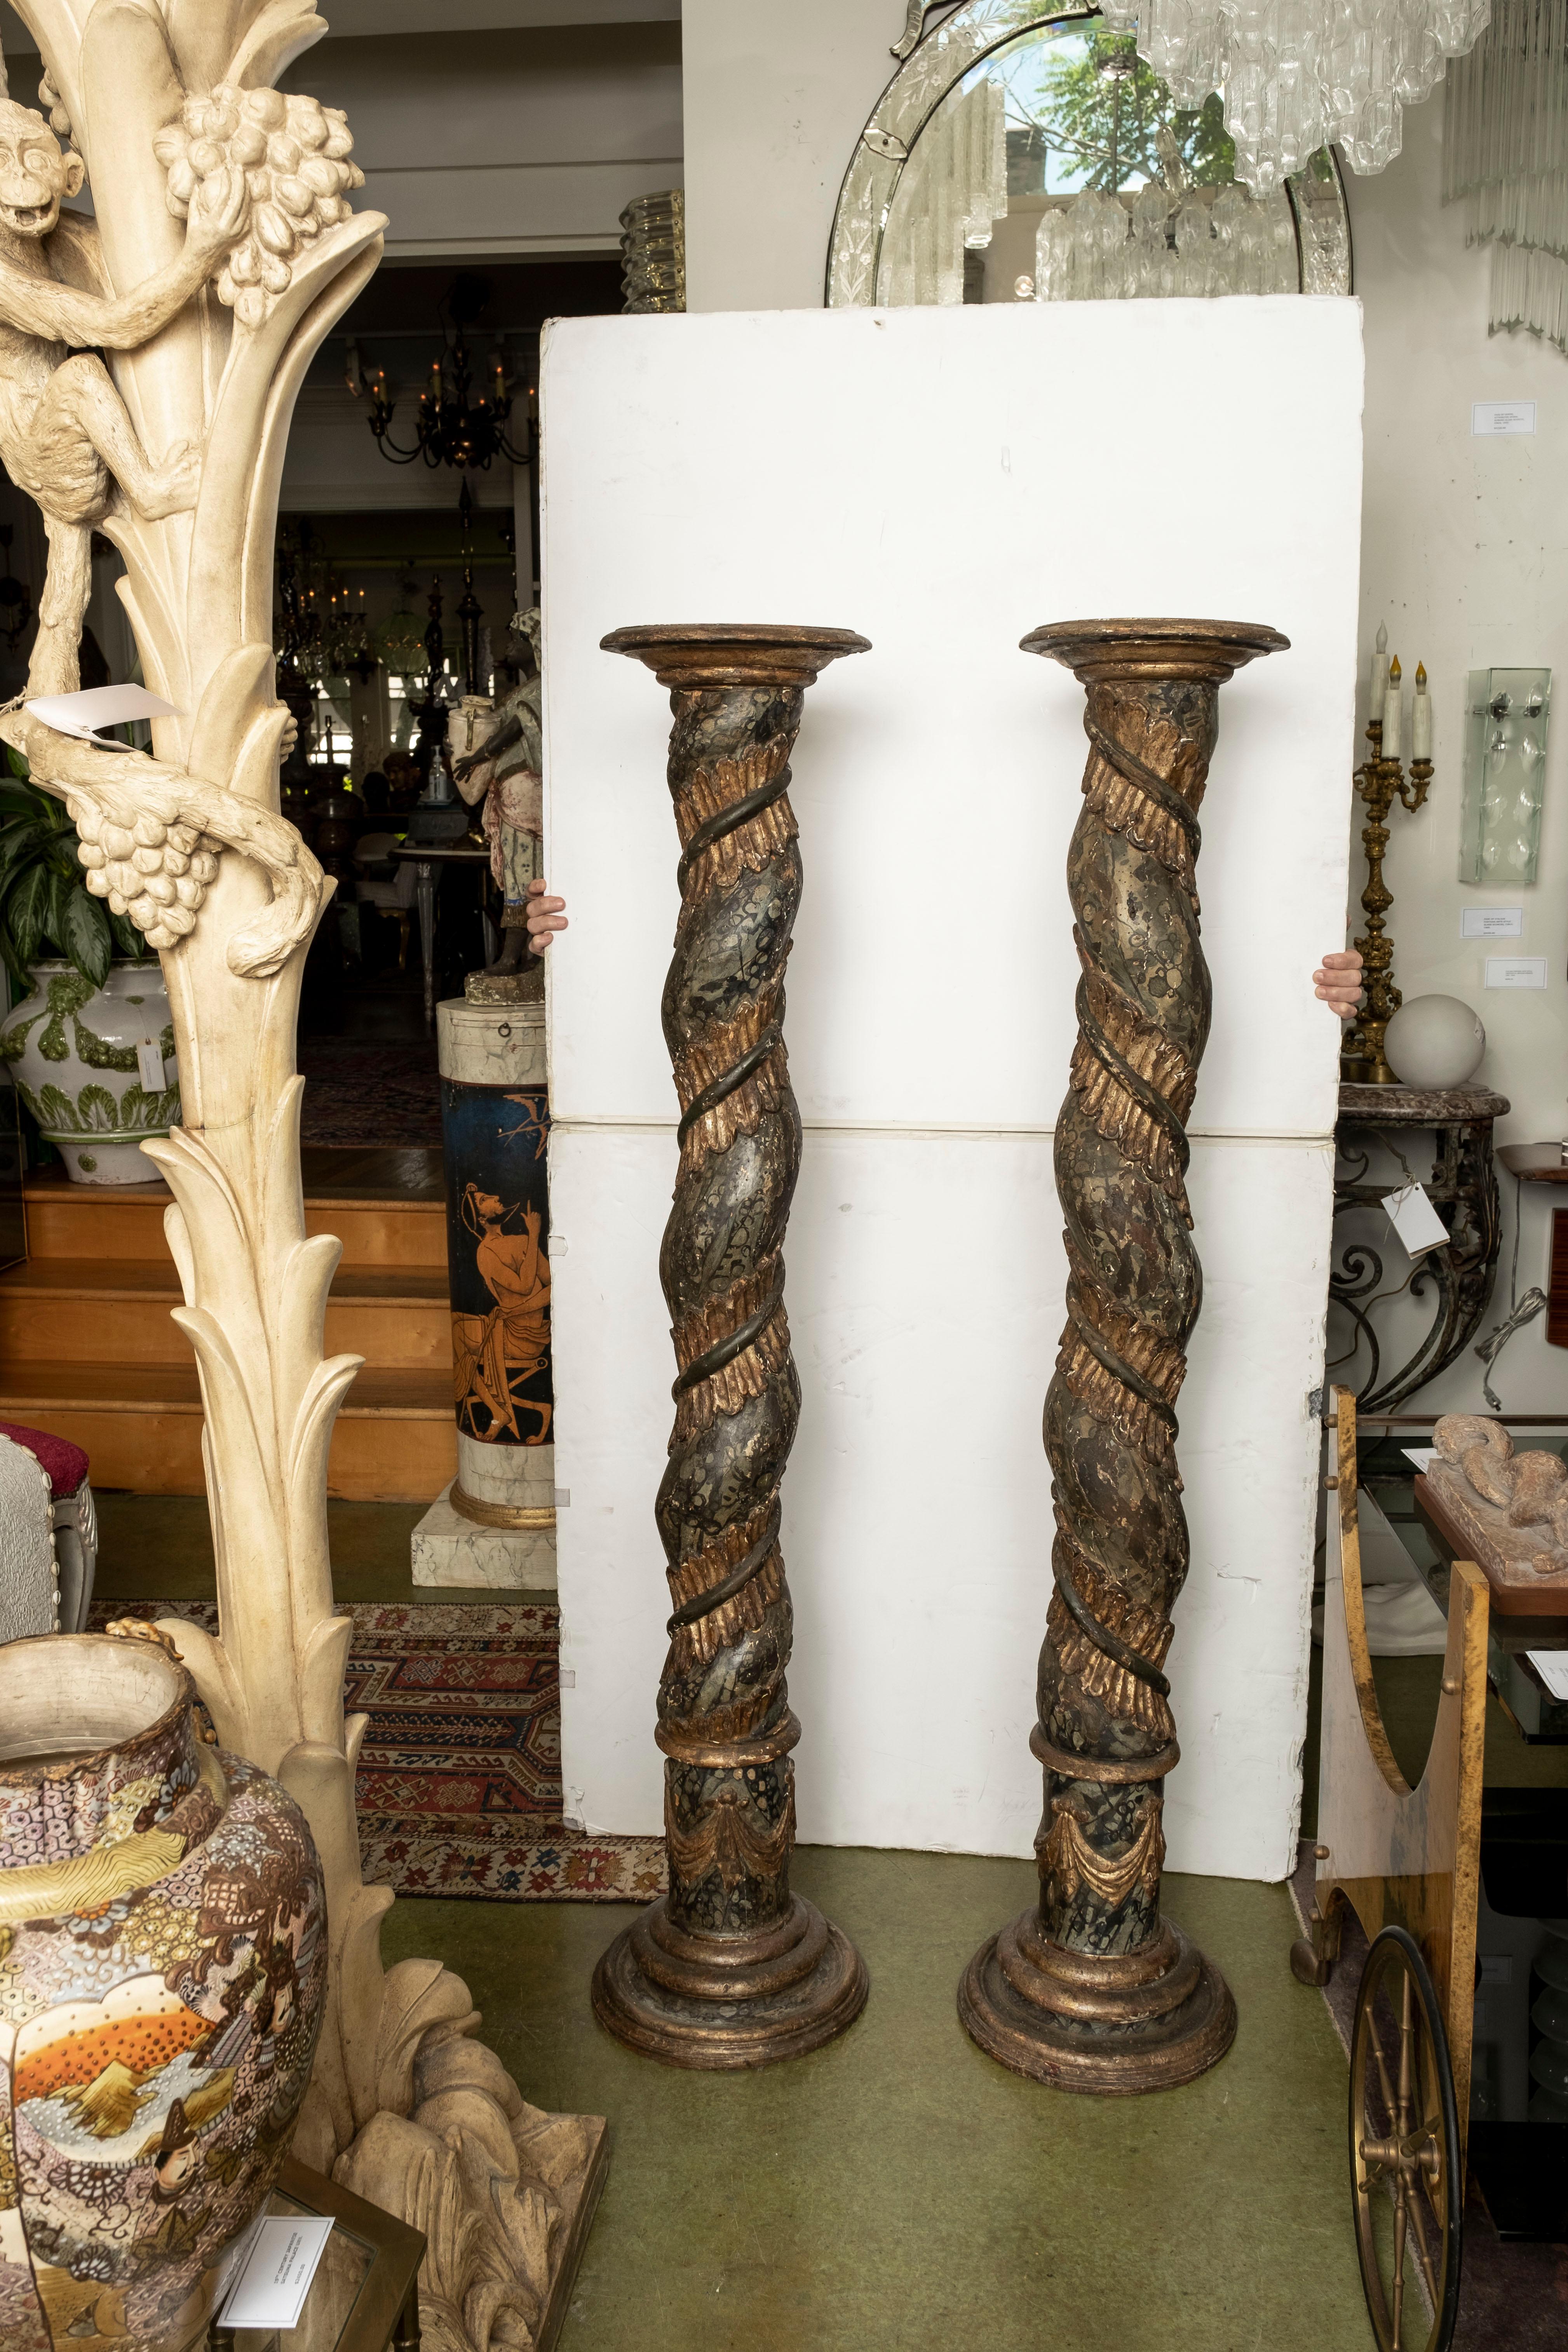 Pair of 18th century Italian Faux marble Torchères. This stunning pair of Italian Tuscan region Baroque carved wood torchieres, columns or pedestals have a faux marble and giltwood finish and would make great pair of floor lamps.